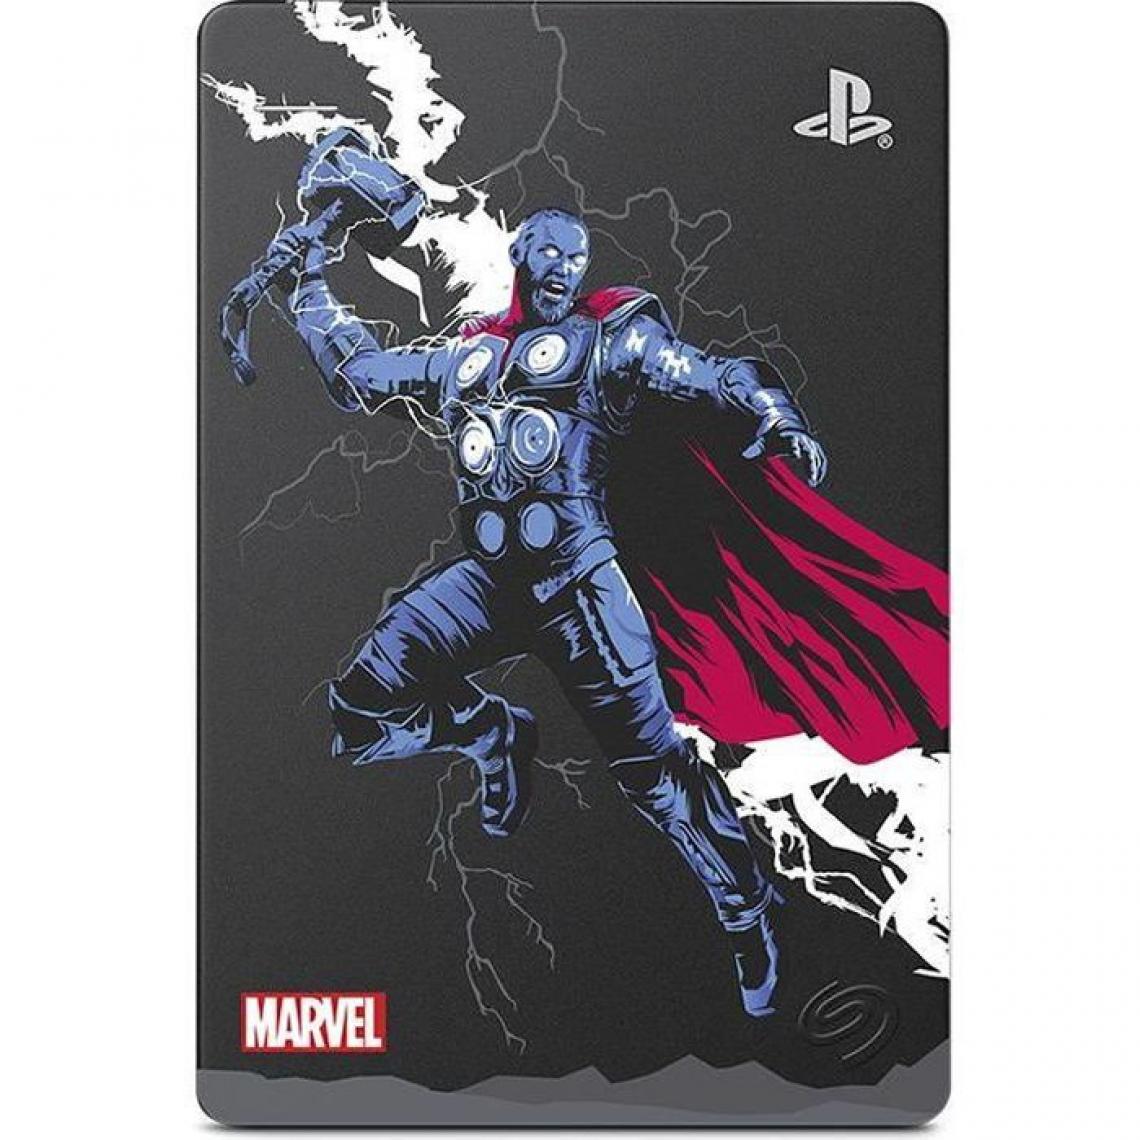 Seagate - SEAGATE - Disque Dur Externe Gaming PS4 - Marvel Avengers Thor - 2To - USB 3.0 (STGD2000205) - Disque Dur interne